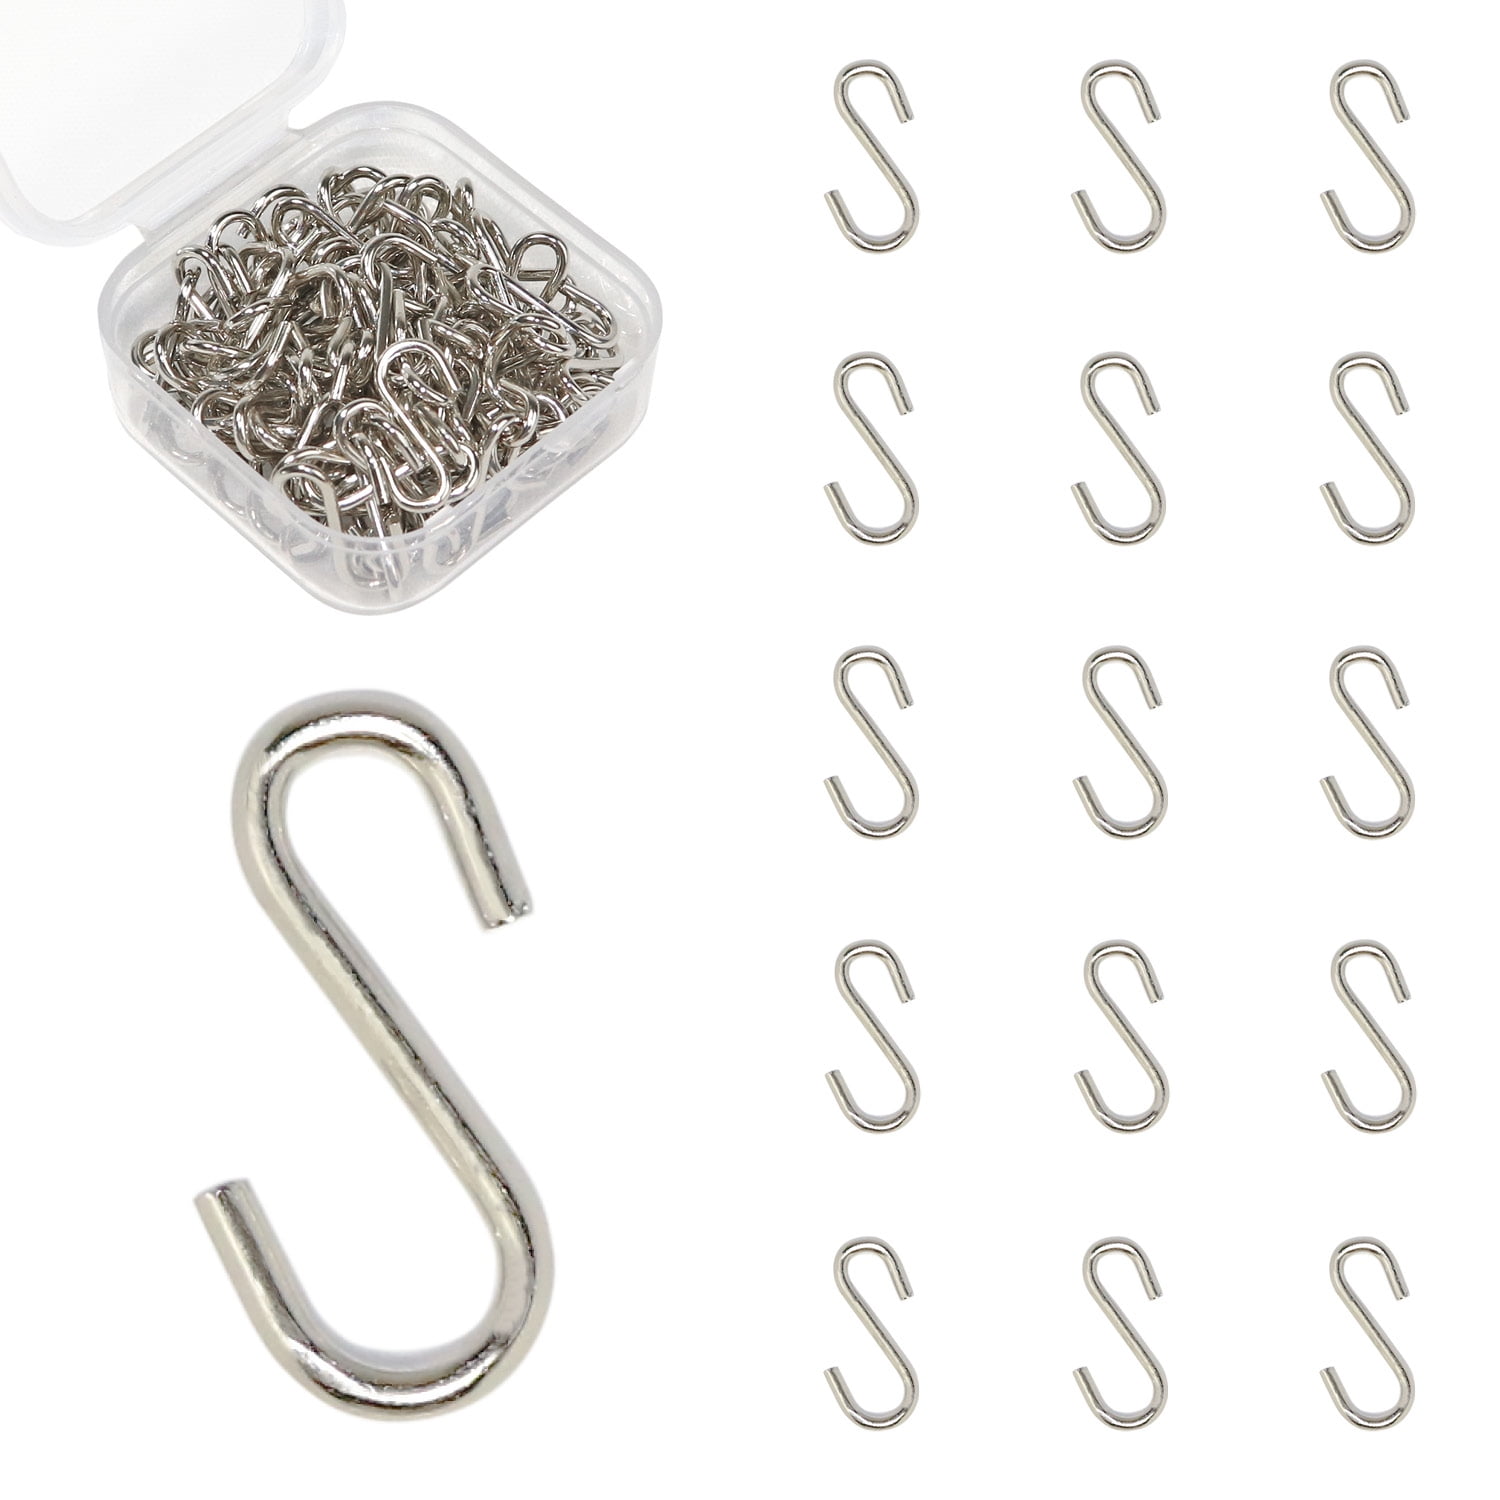 100pcs DIY Mini S-shaped Hooks Metal DIY Jewelry Accessory for Store Store Home